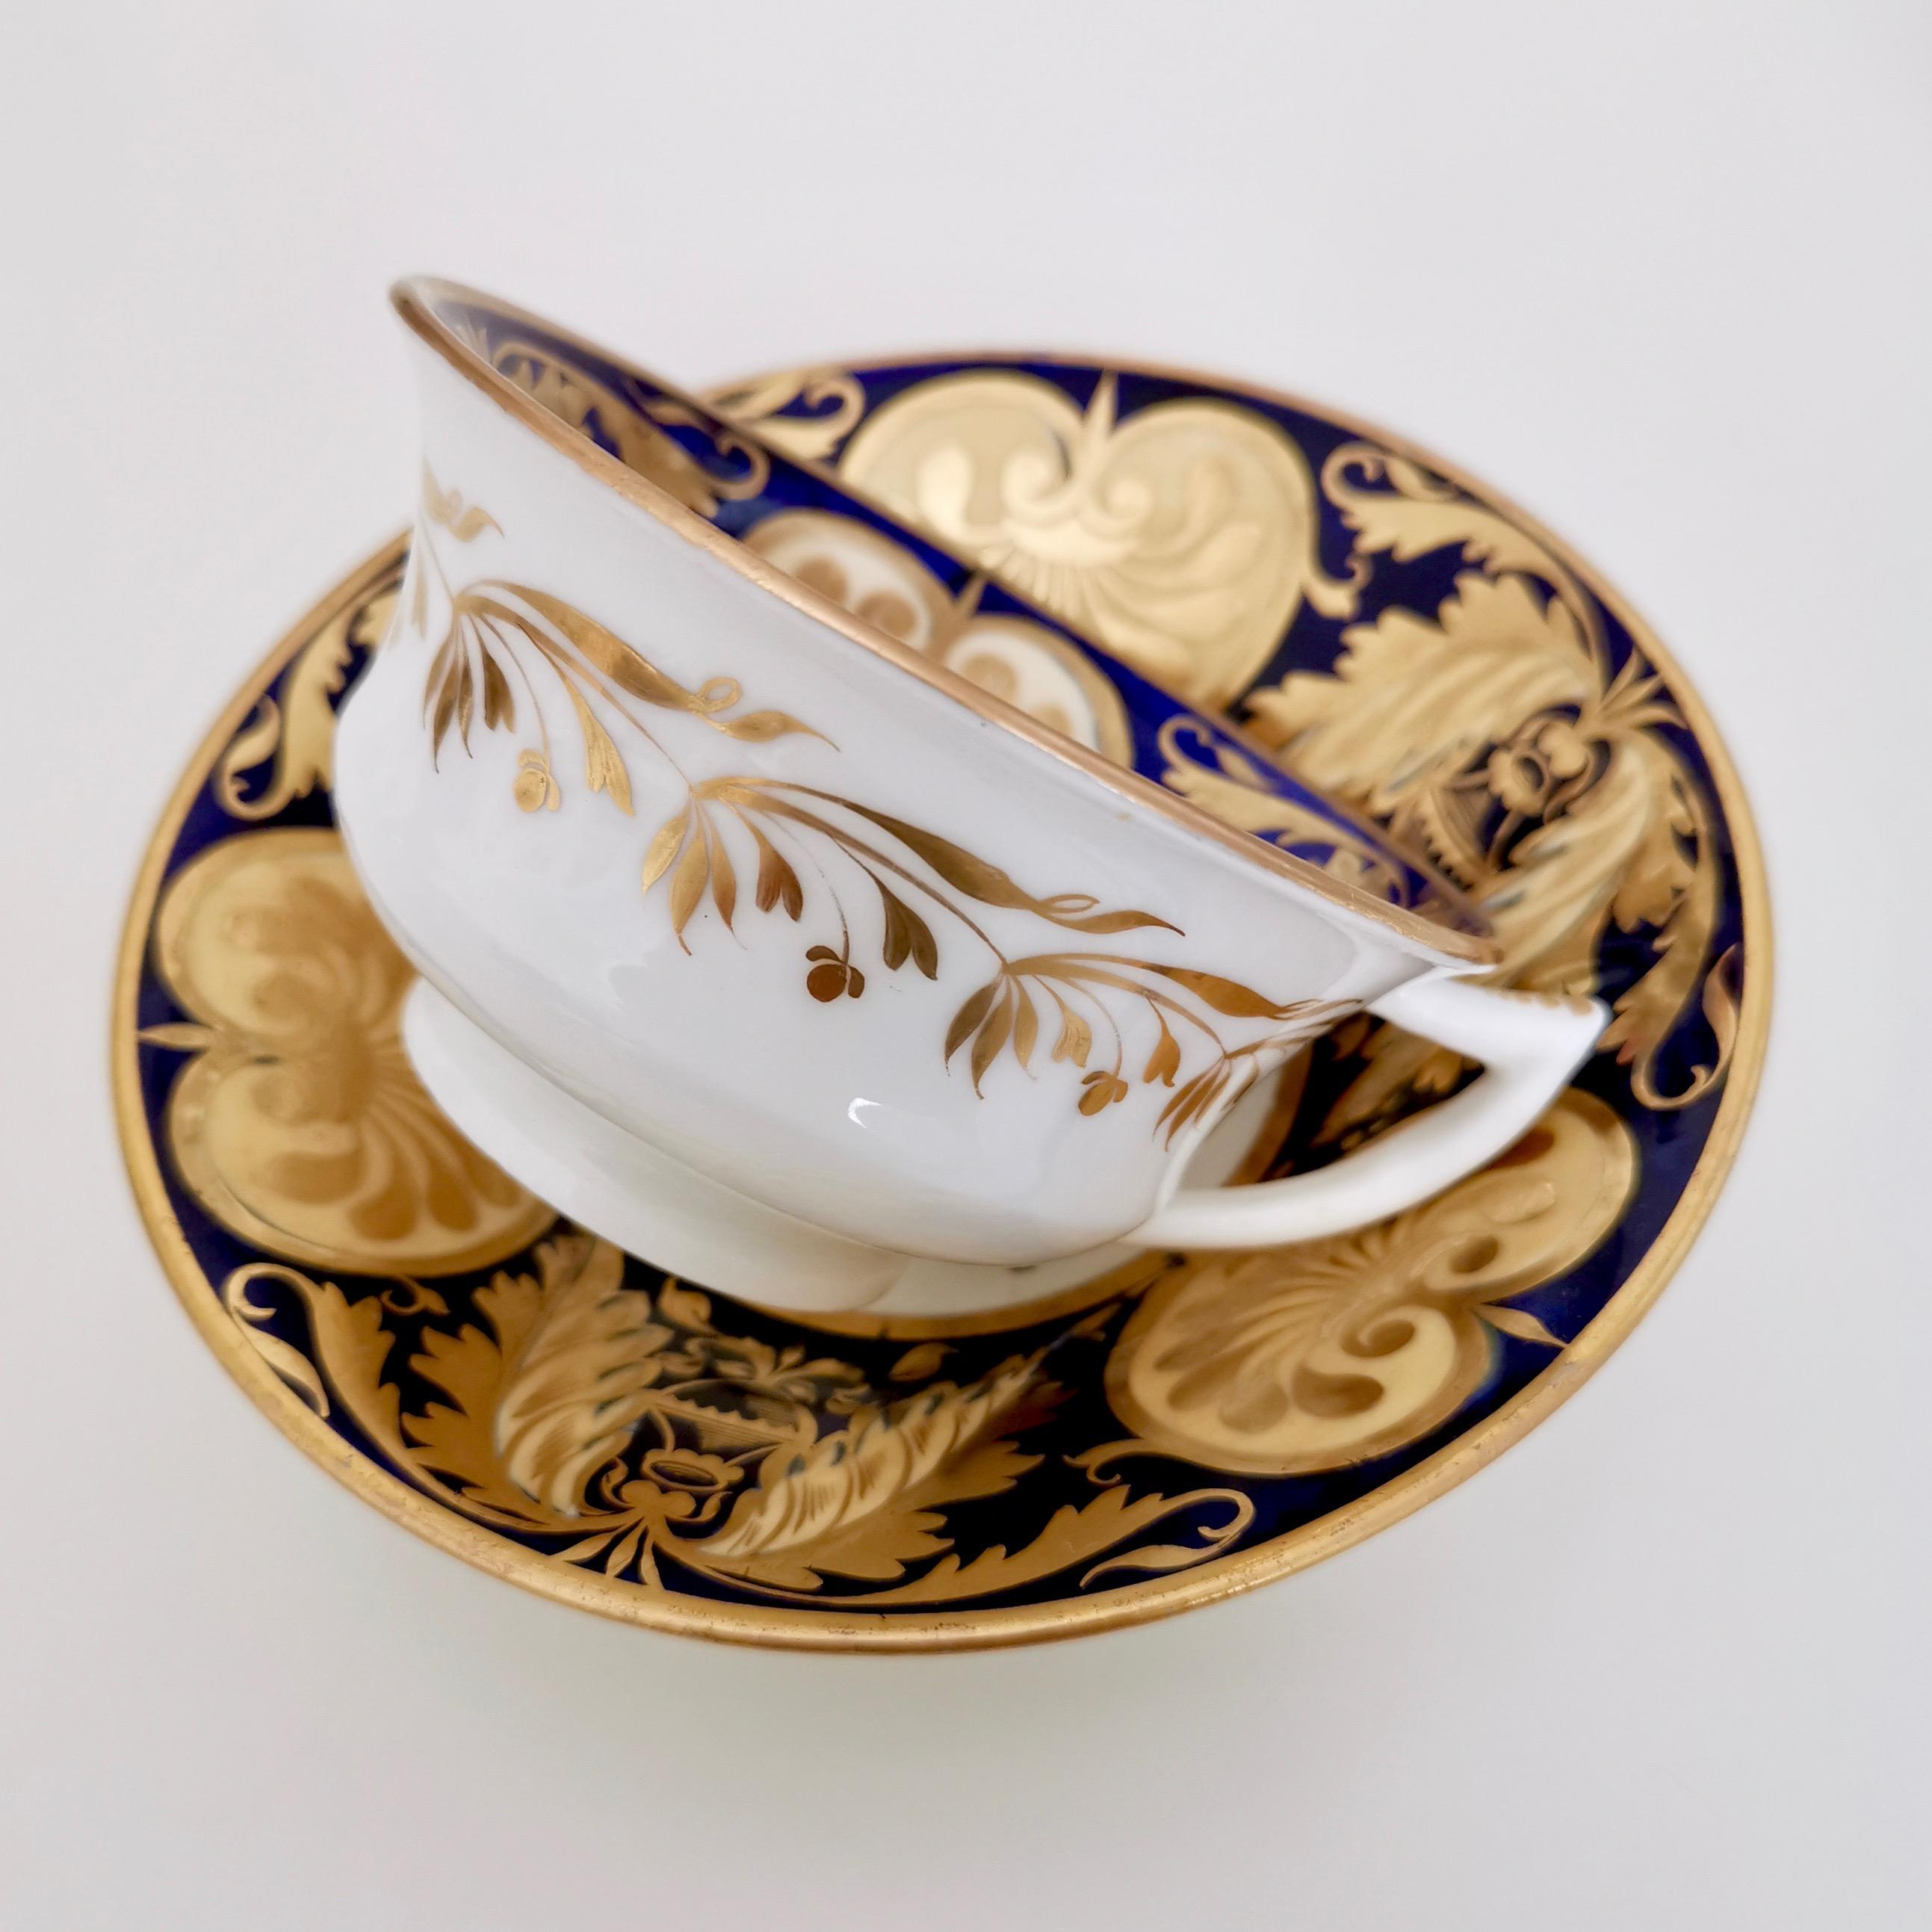 Early 19th Century Staffordshire Teacup Trio, Superb 